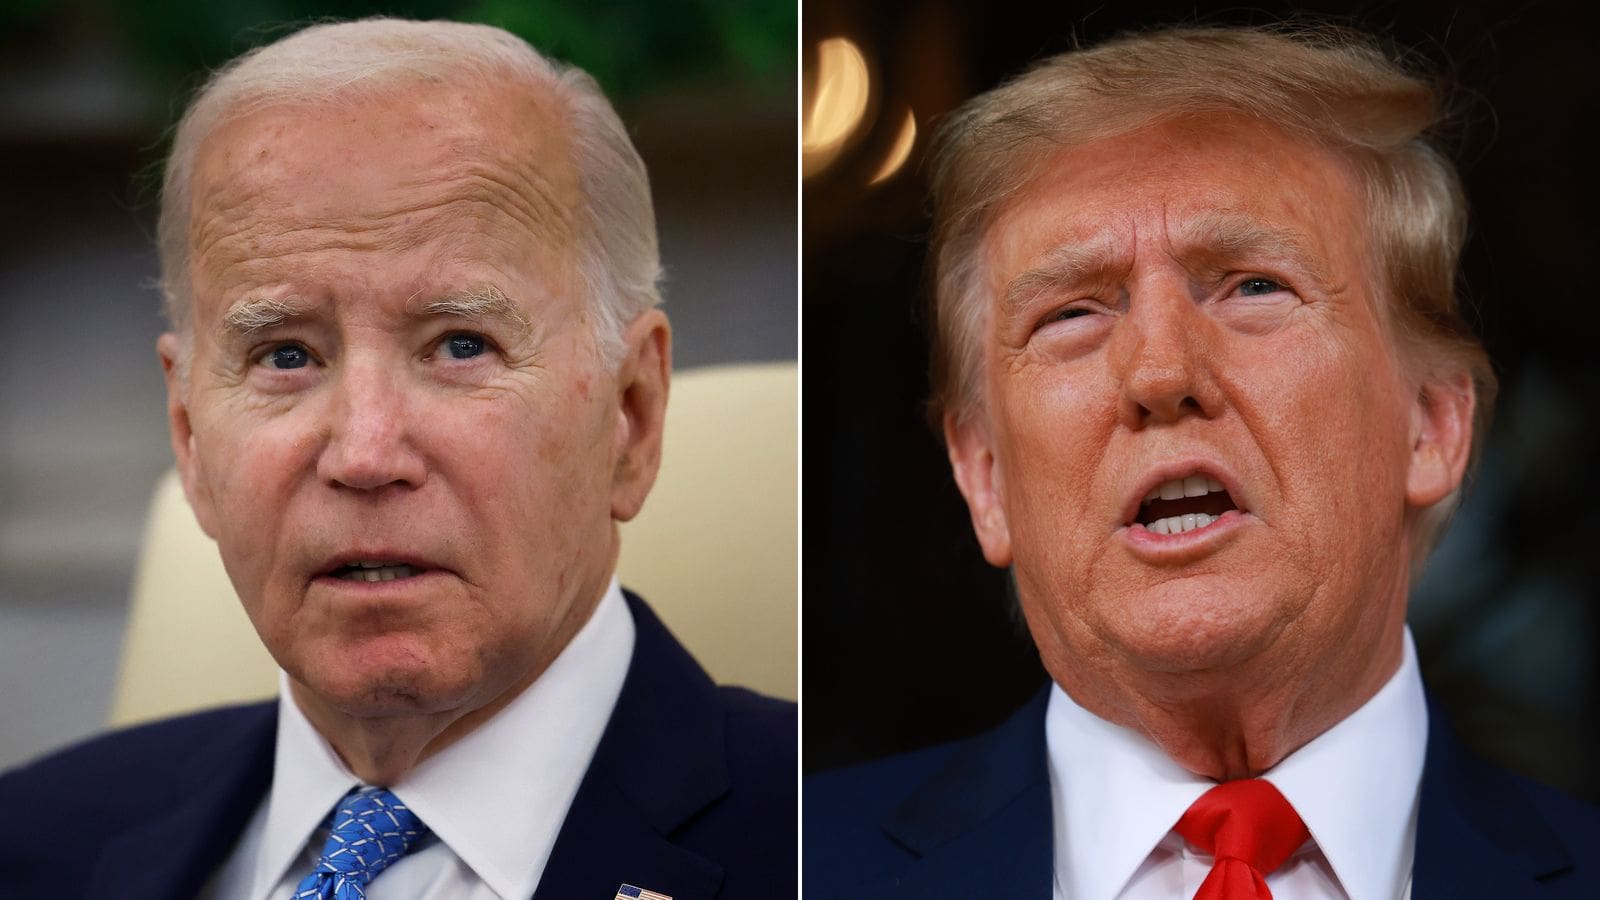 Say What Now? Donald Trump Demands Joe Biden Take Drug Test Ahead of the Debates After His State of the Union Address: ‘He Was High as a Kite’